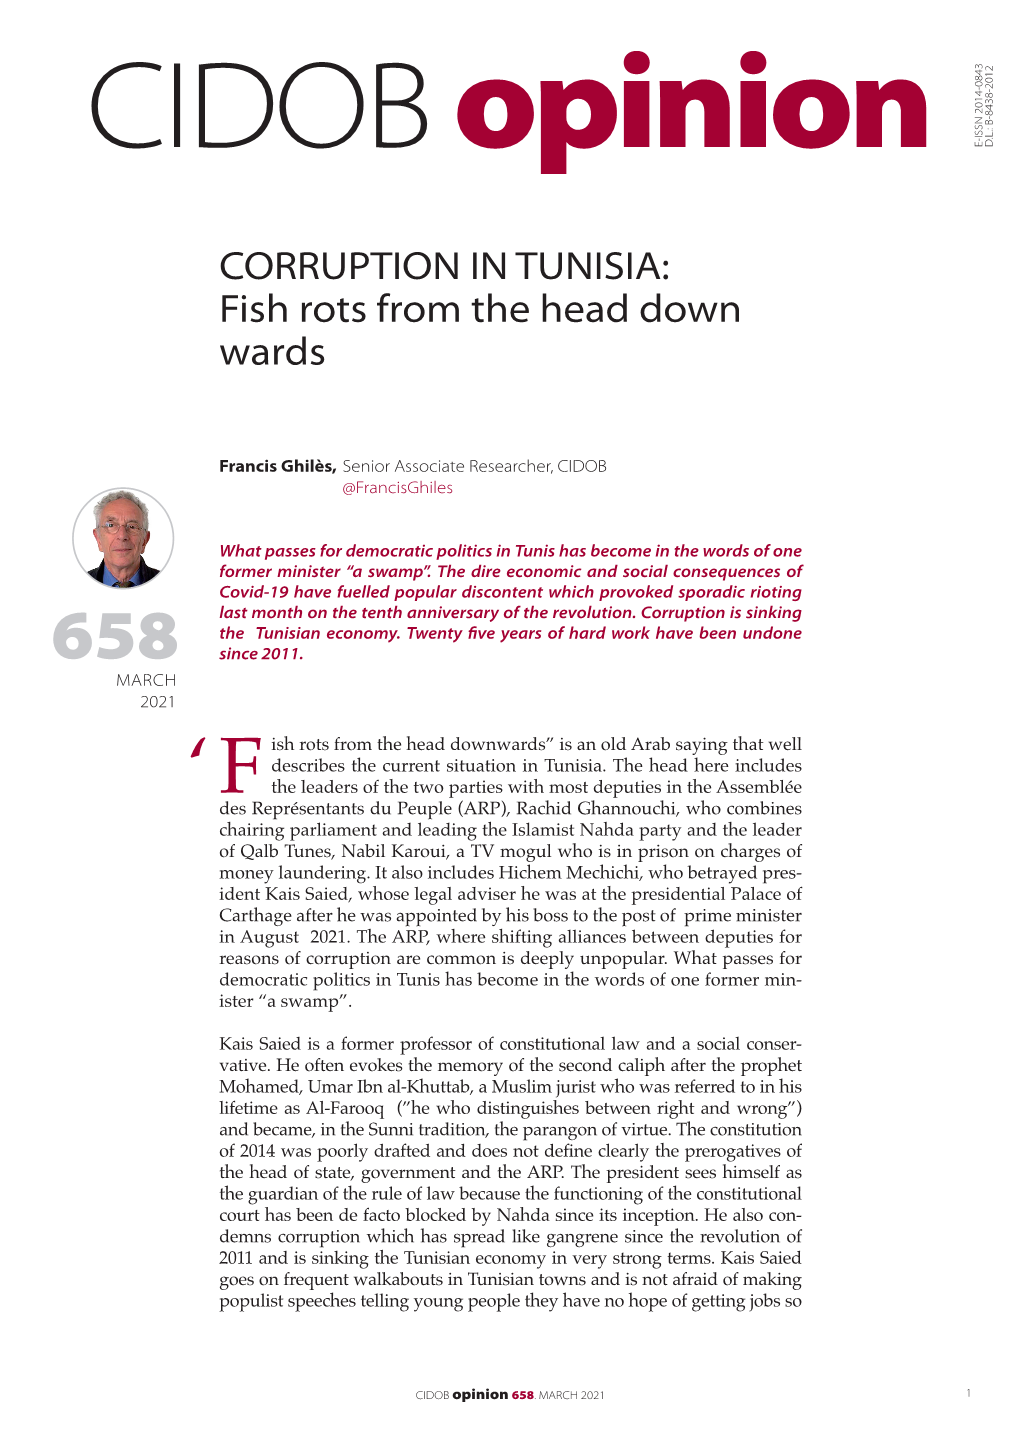 CORRUPTION in TUNISIA: Fish Rots from the Head Down Wards